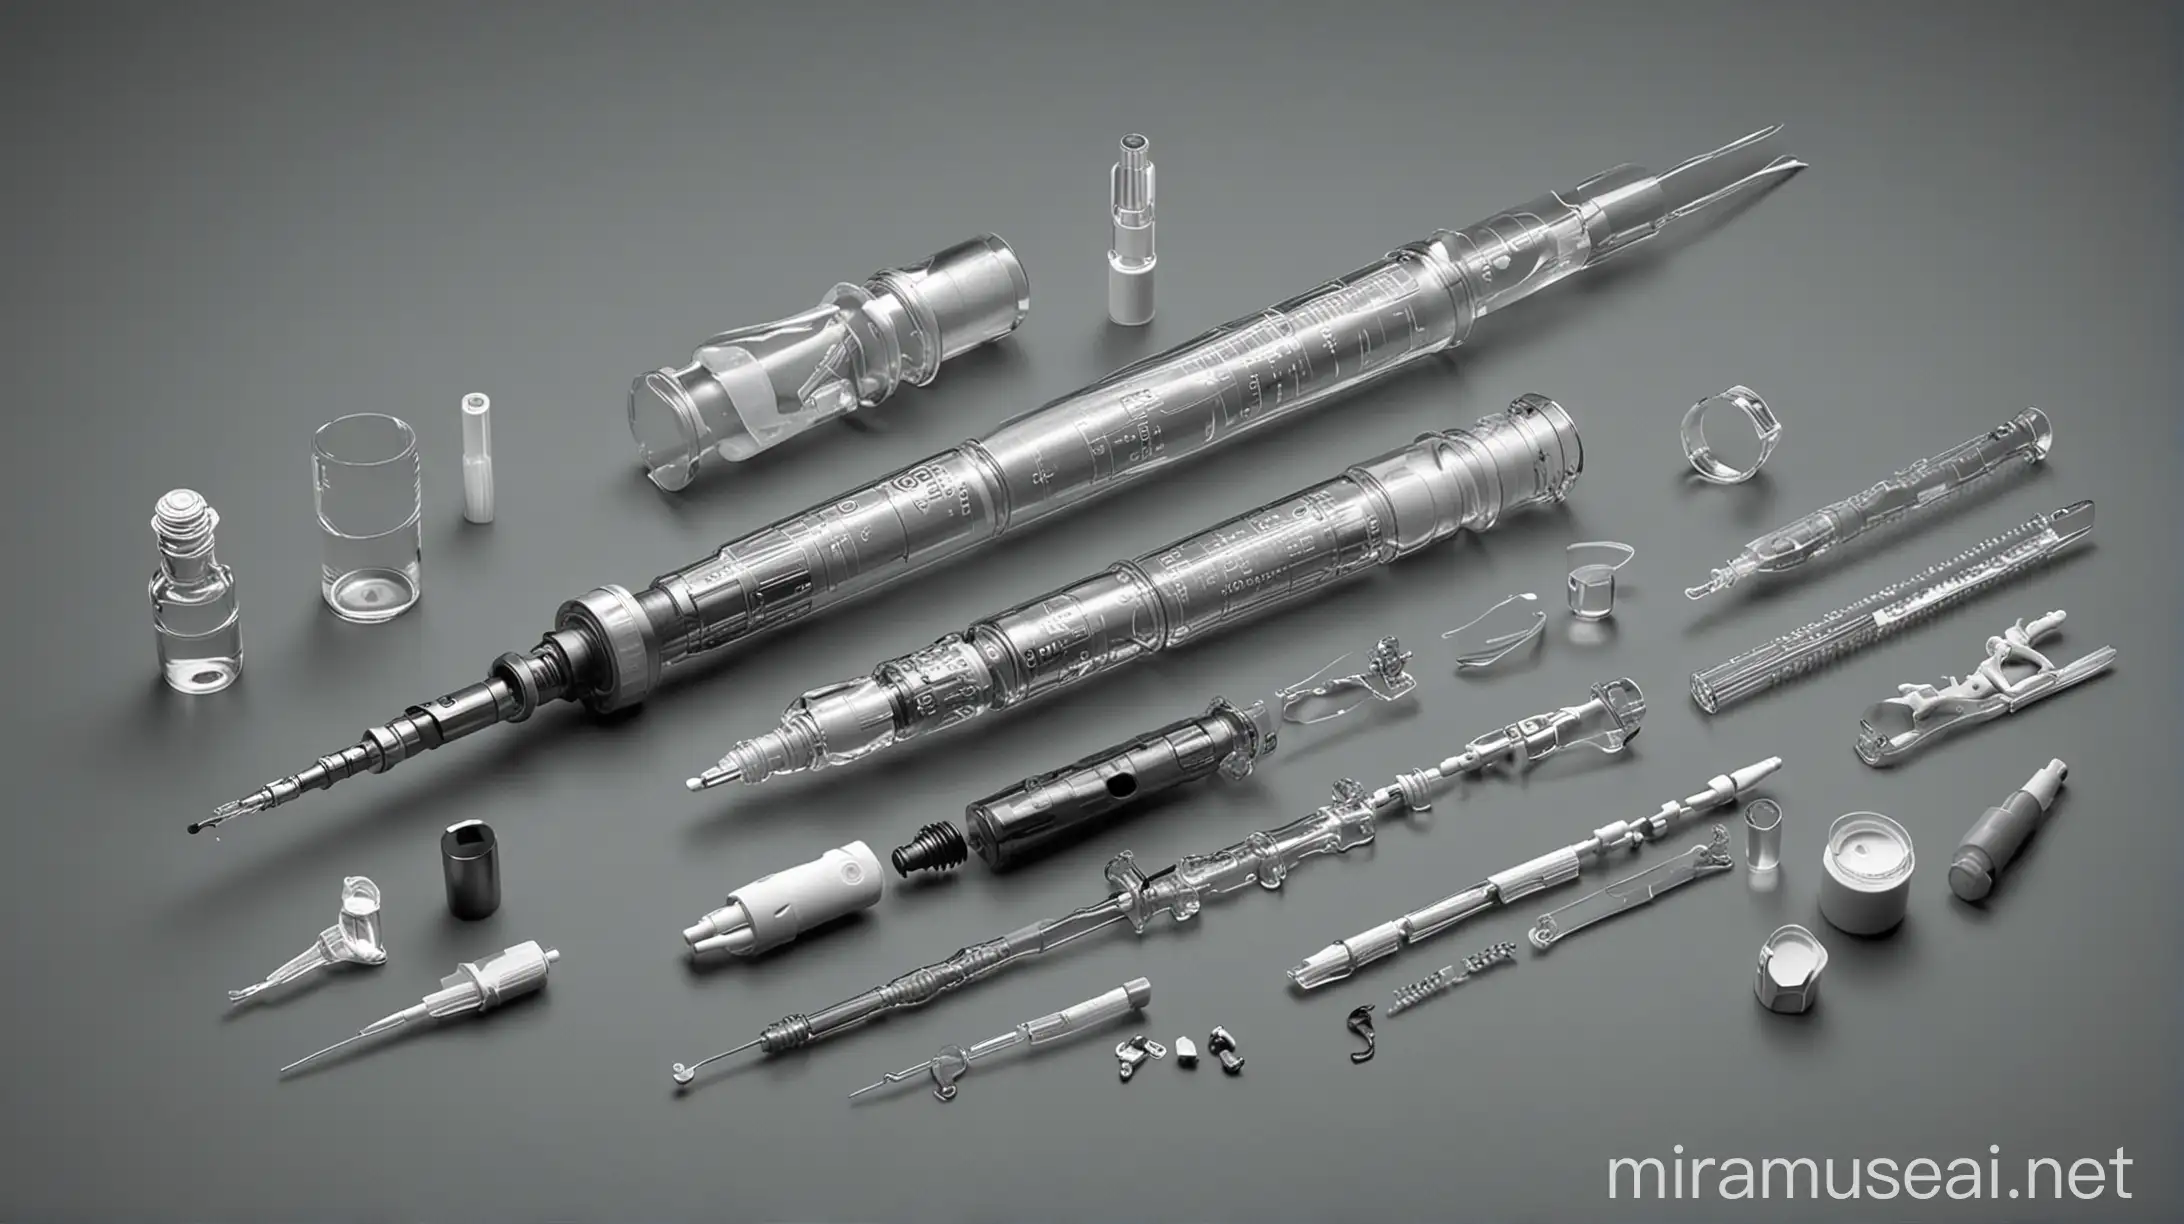 Disassembly, exploded view of a prefilled syringe, high level of detail and image definition. Separate parts: Plunger, Glass cylinder, Rubber stopper, Liquid compartment, Needle hub, Tamper-evident seal, Needle, Needle cap.